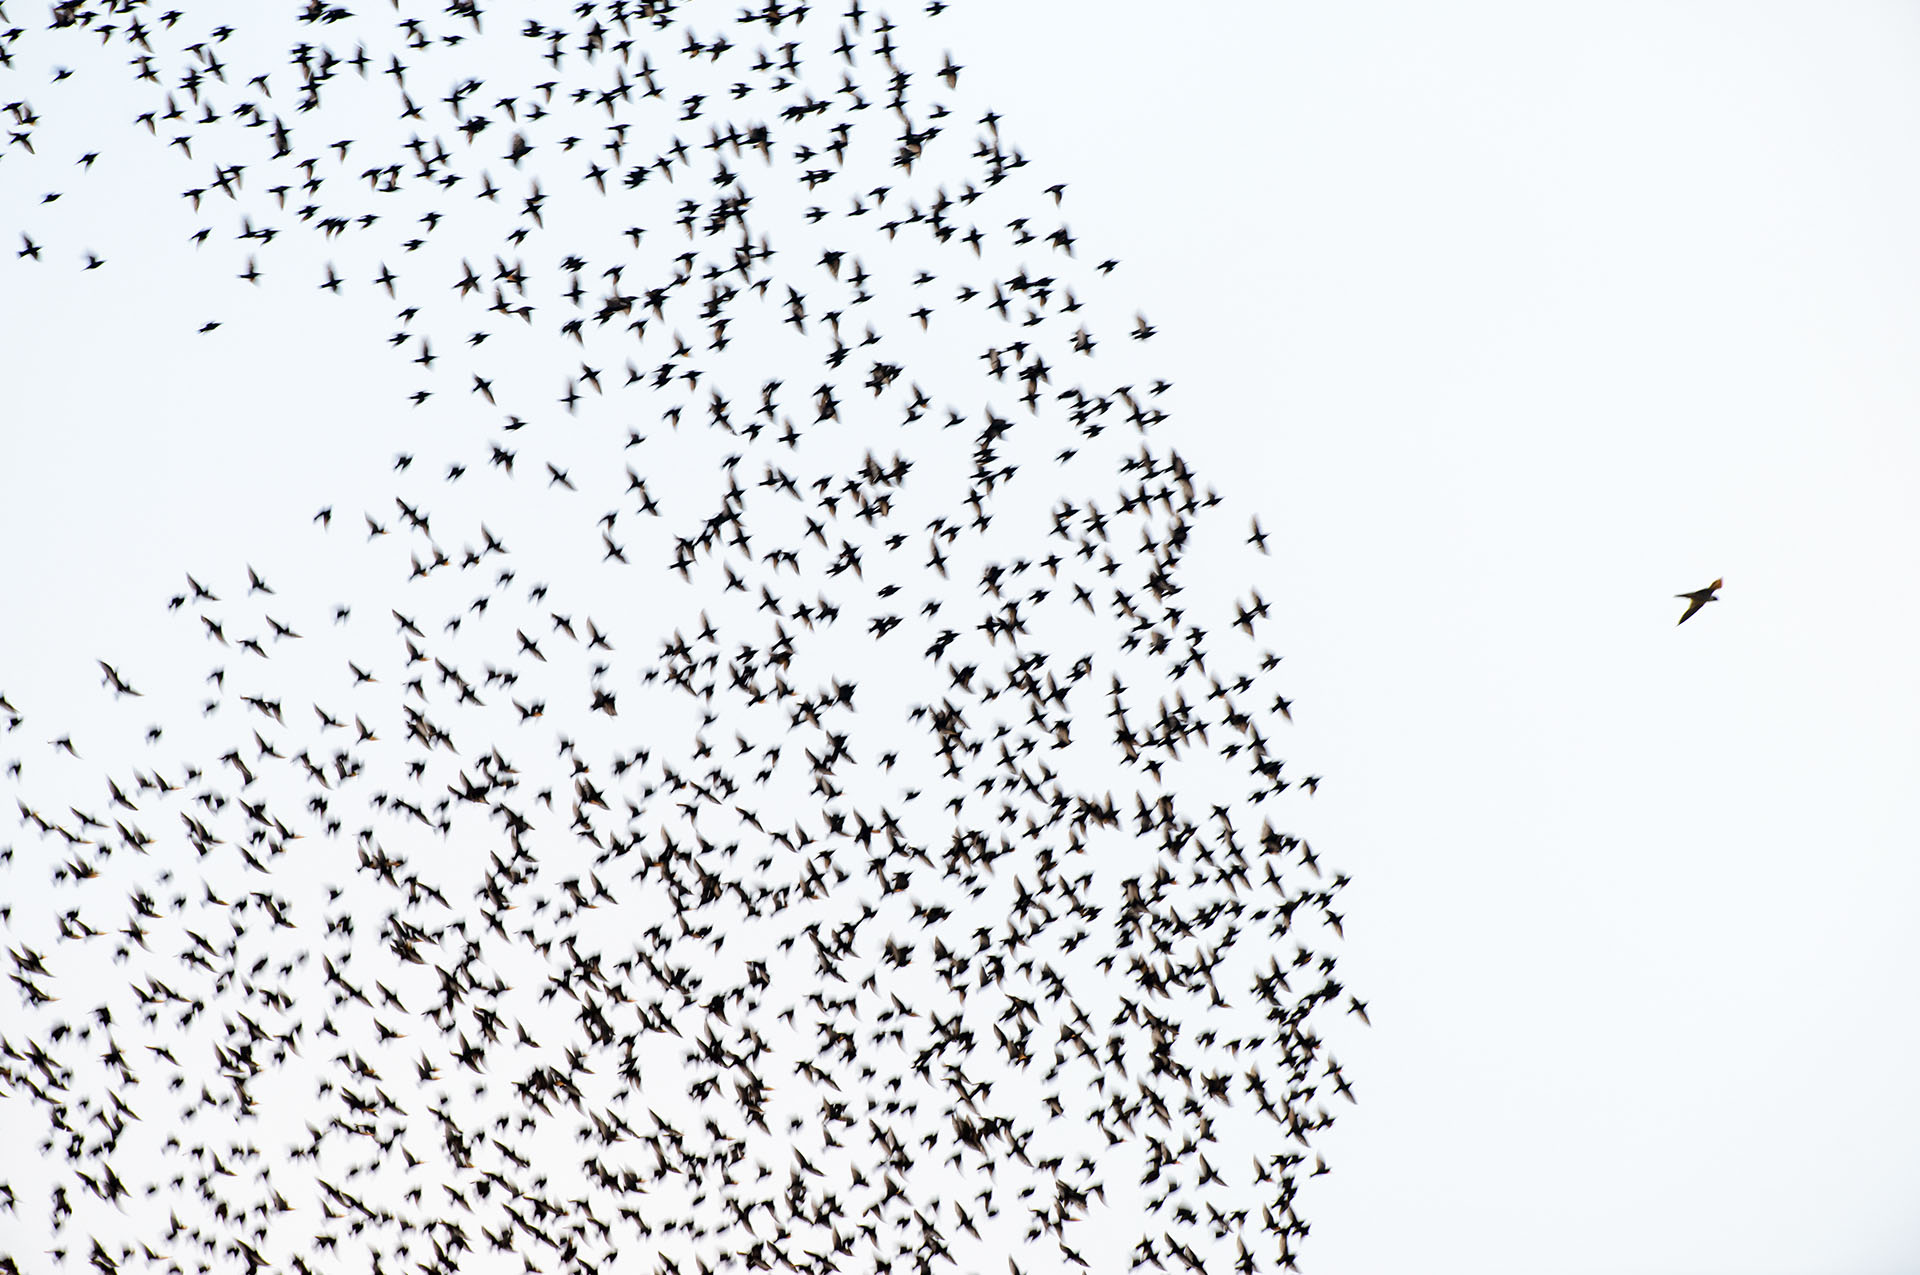 A group of common starlings and a peregrine falcon